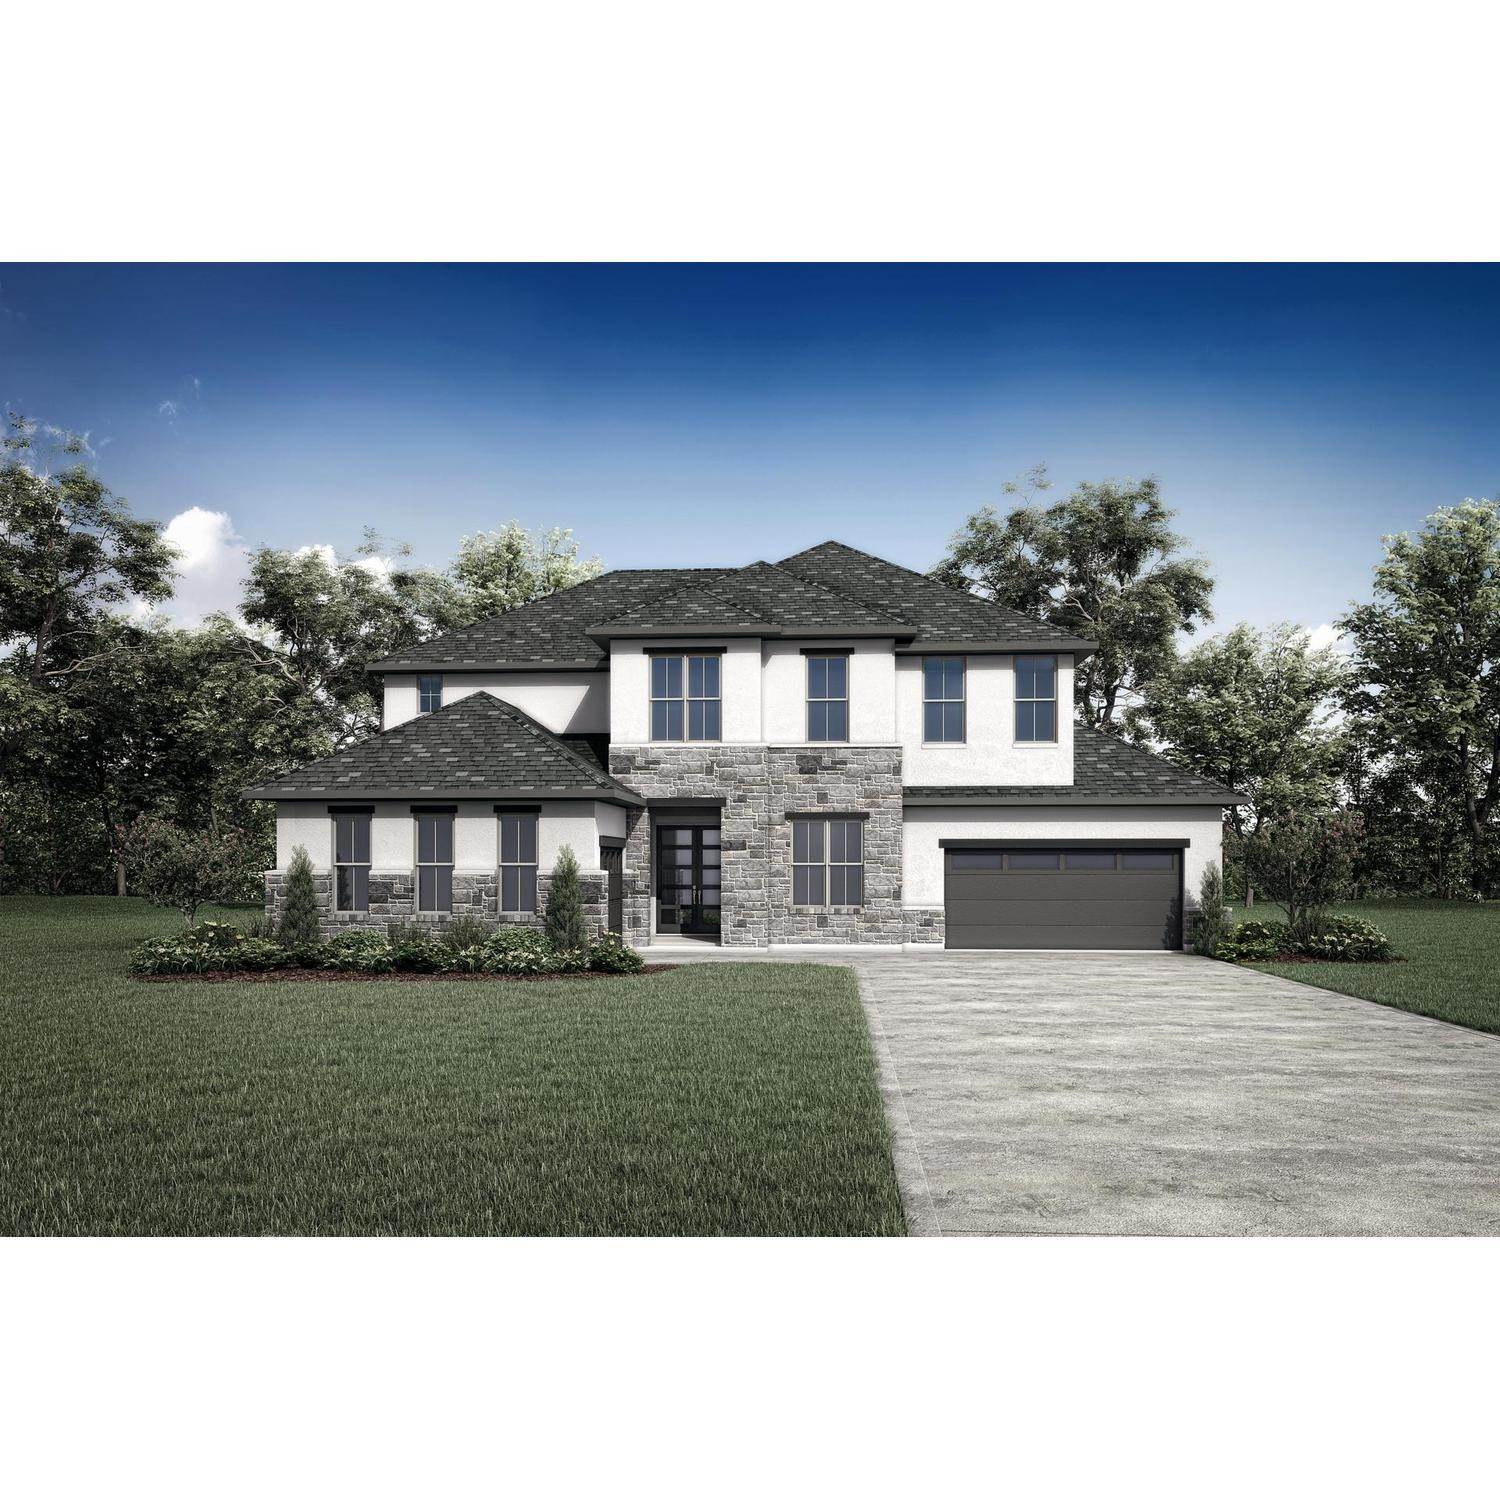 Single Family for Sale at Walsh 70' - Briargate 2009 Roundtree Circle ALEDO, TEXAS 76008 UNITED STATES